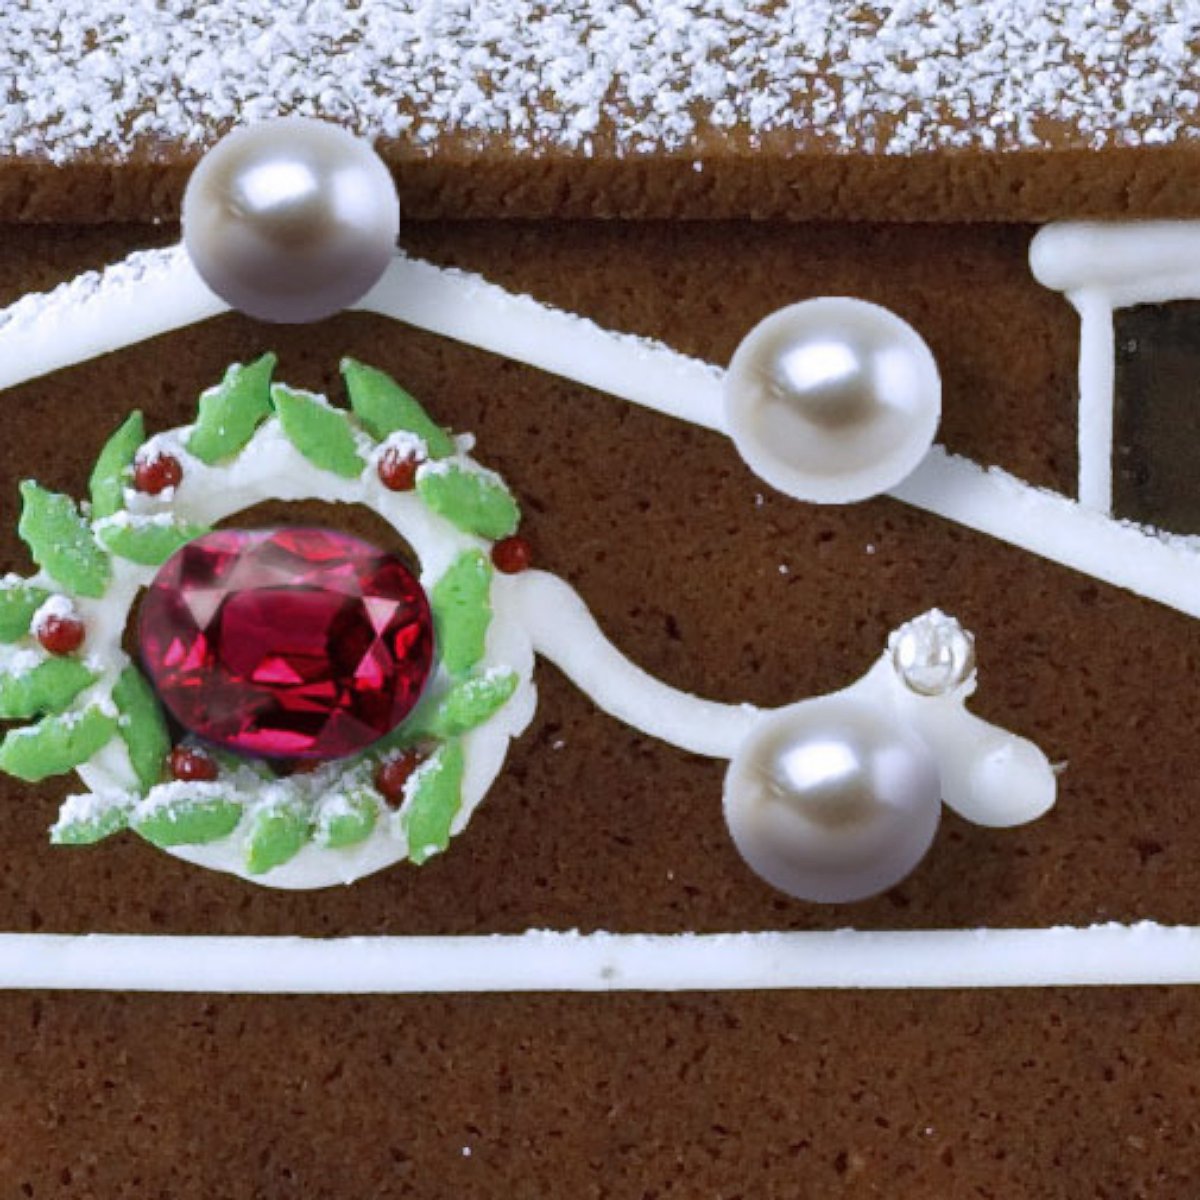 PHOTO:  A close-up of the ruby and pearls on the $77,000 gingerbread house.